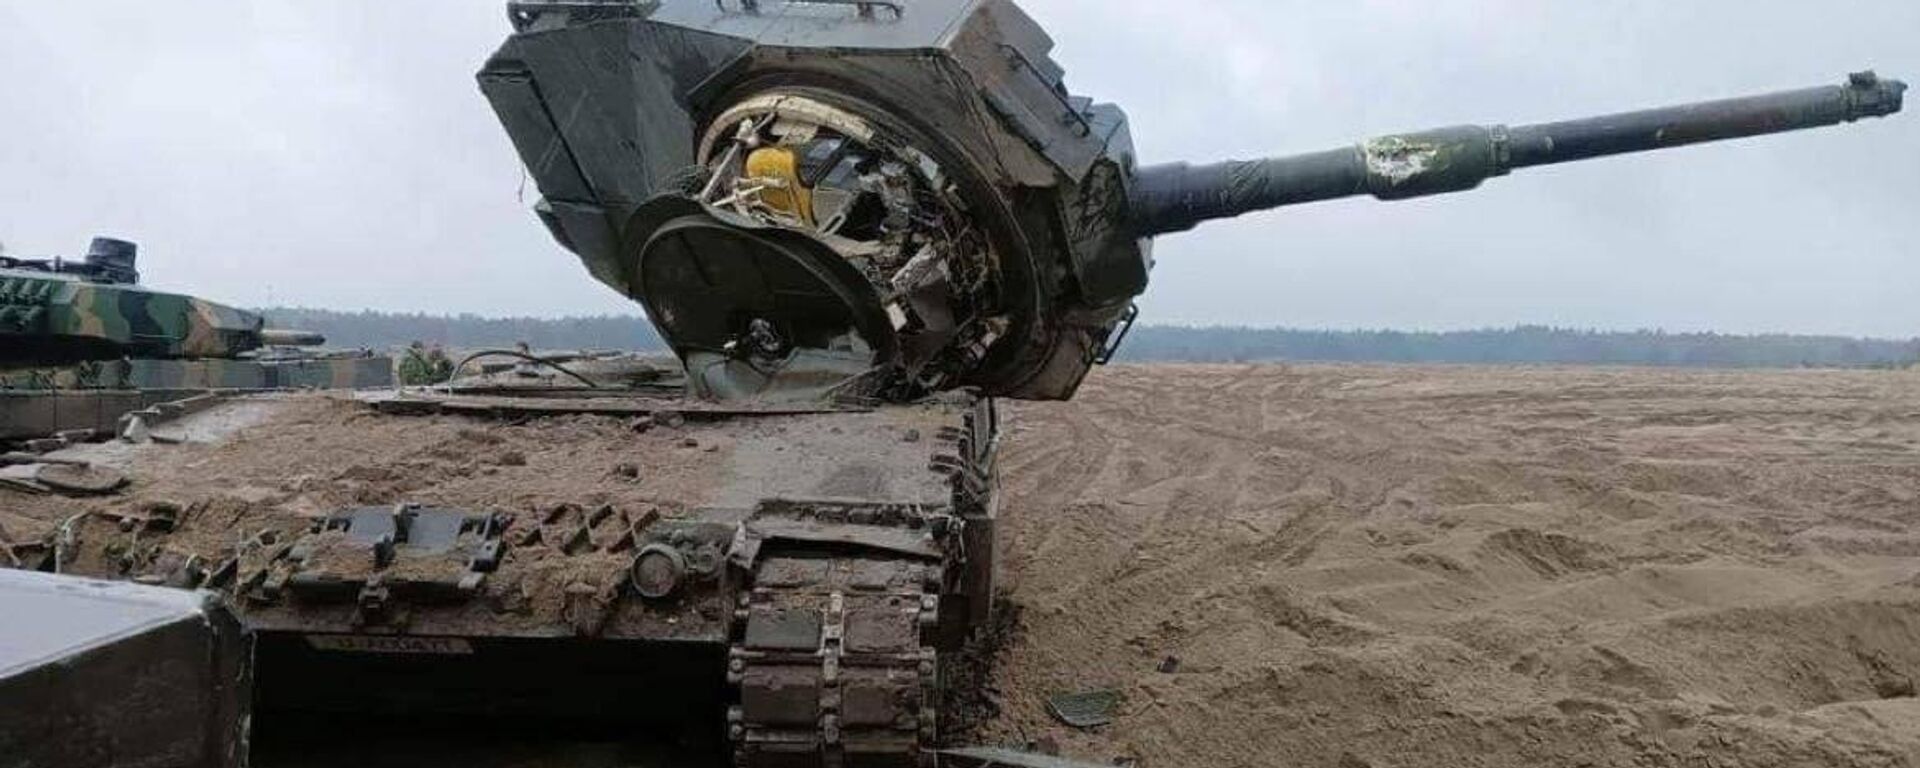 Leopard 2 with its turret ripped off after an accident during training by Ukrainian tankers in western Poland.  - Sputnik International, 1920, 12.06.2023